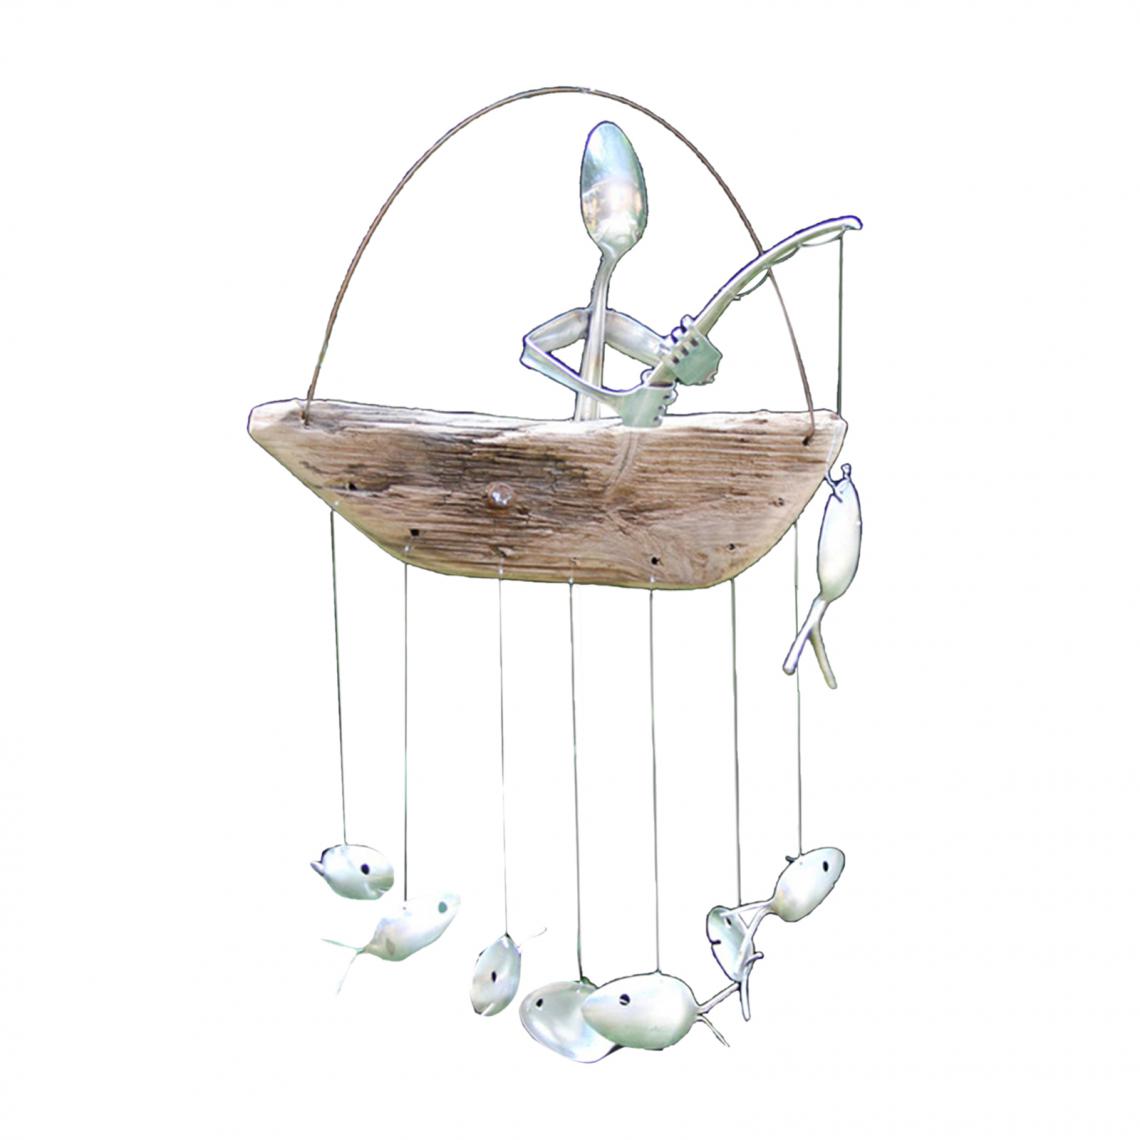 marque generique - Creative Hanging Wind Chime Wind Bell Garden Home Balcon 2 Personnes Style - Objets déco